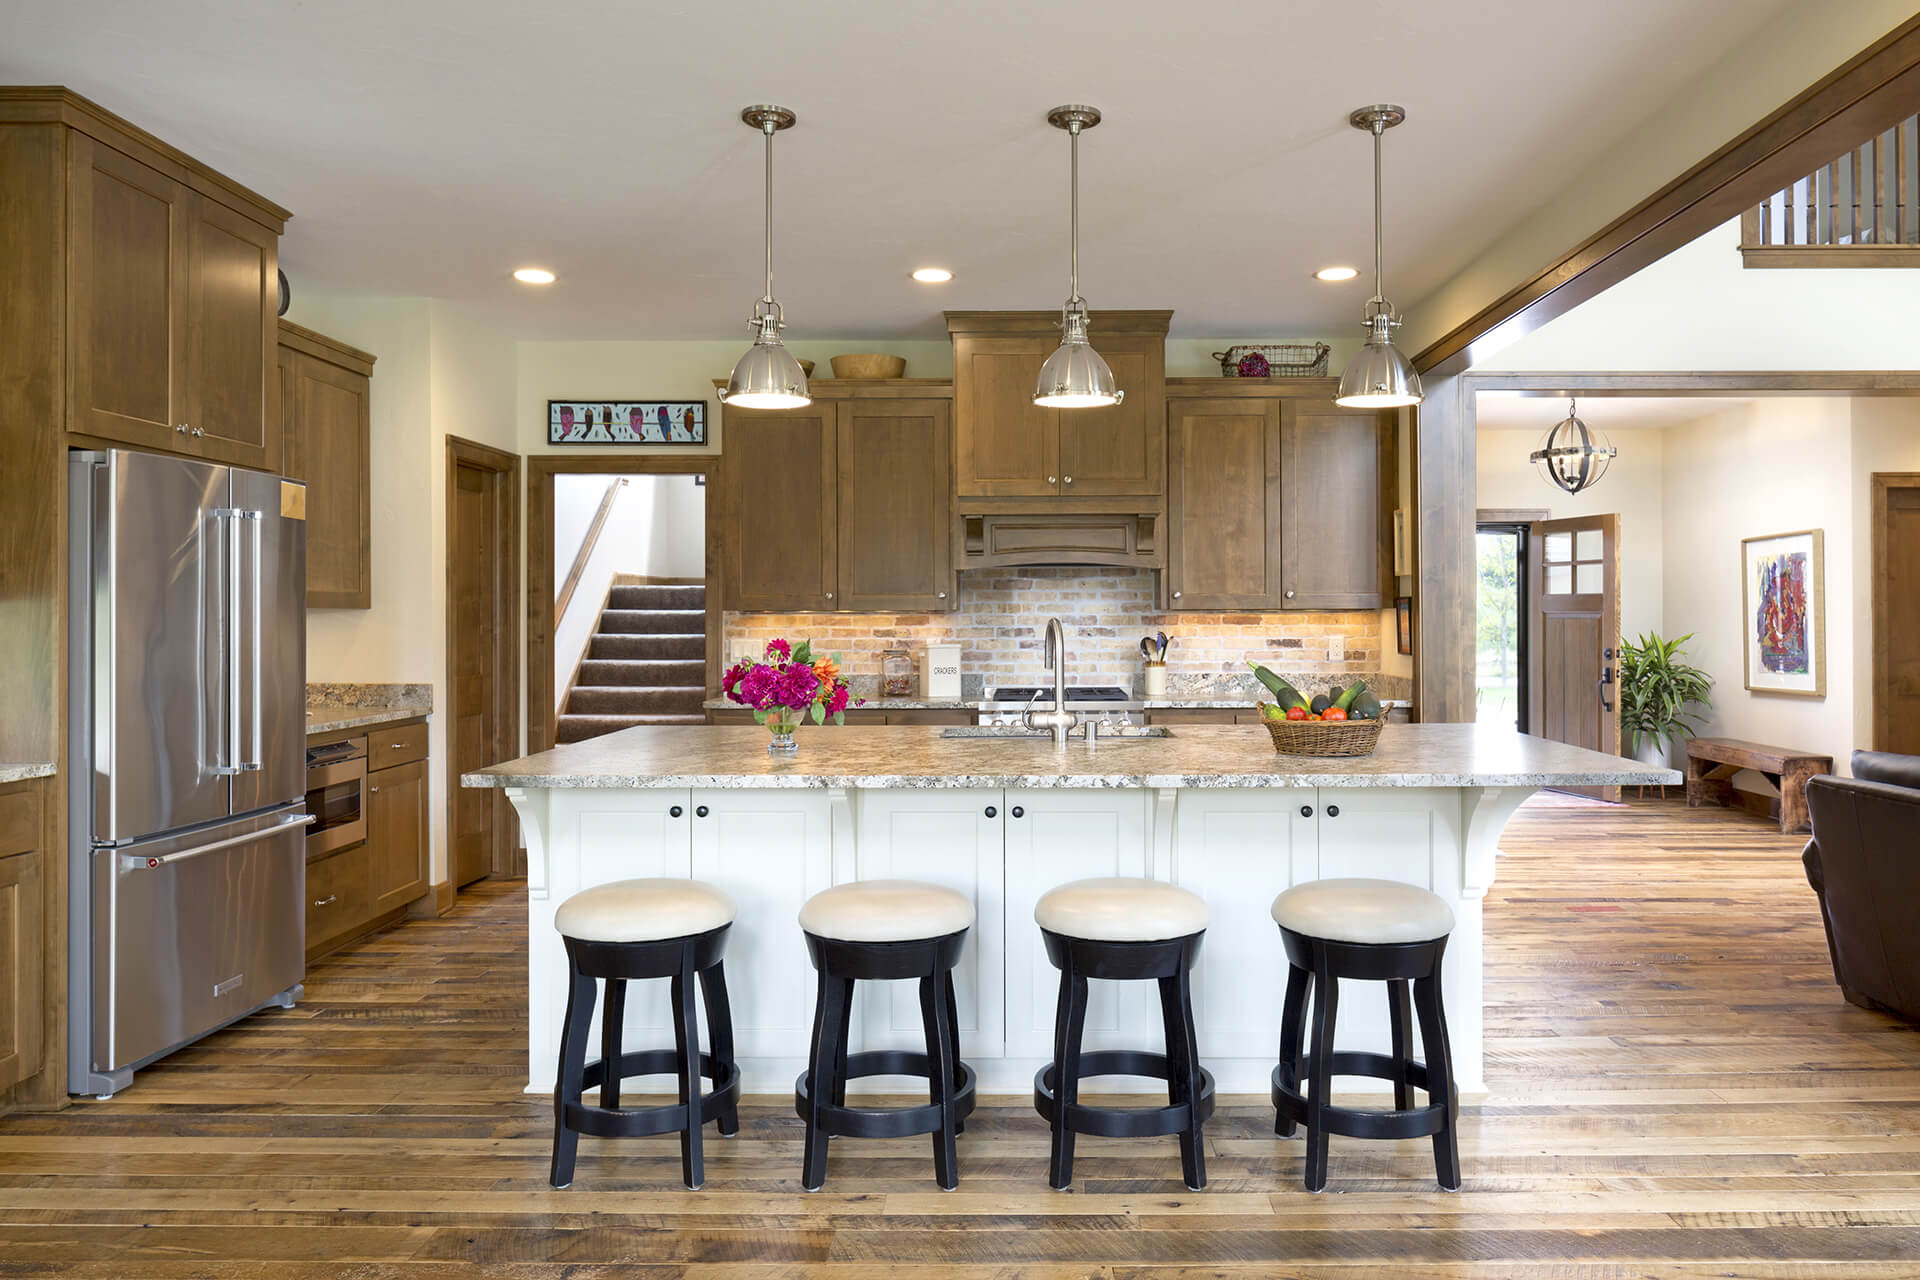 Genesee Lake Farmhouse kitchen and barstool seating area